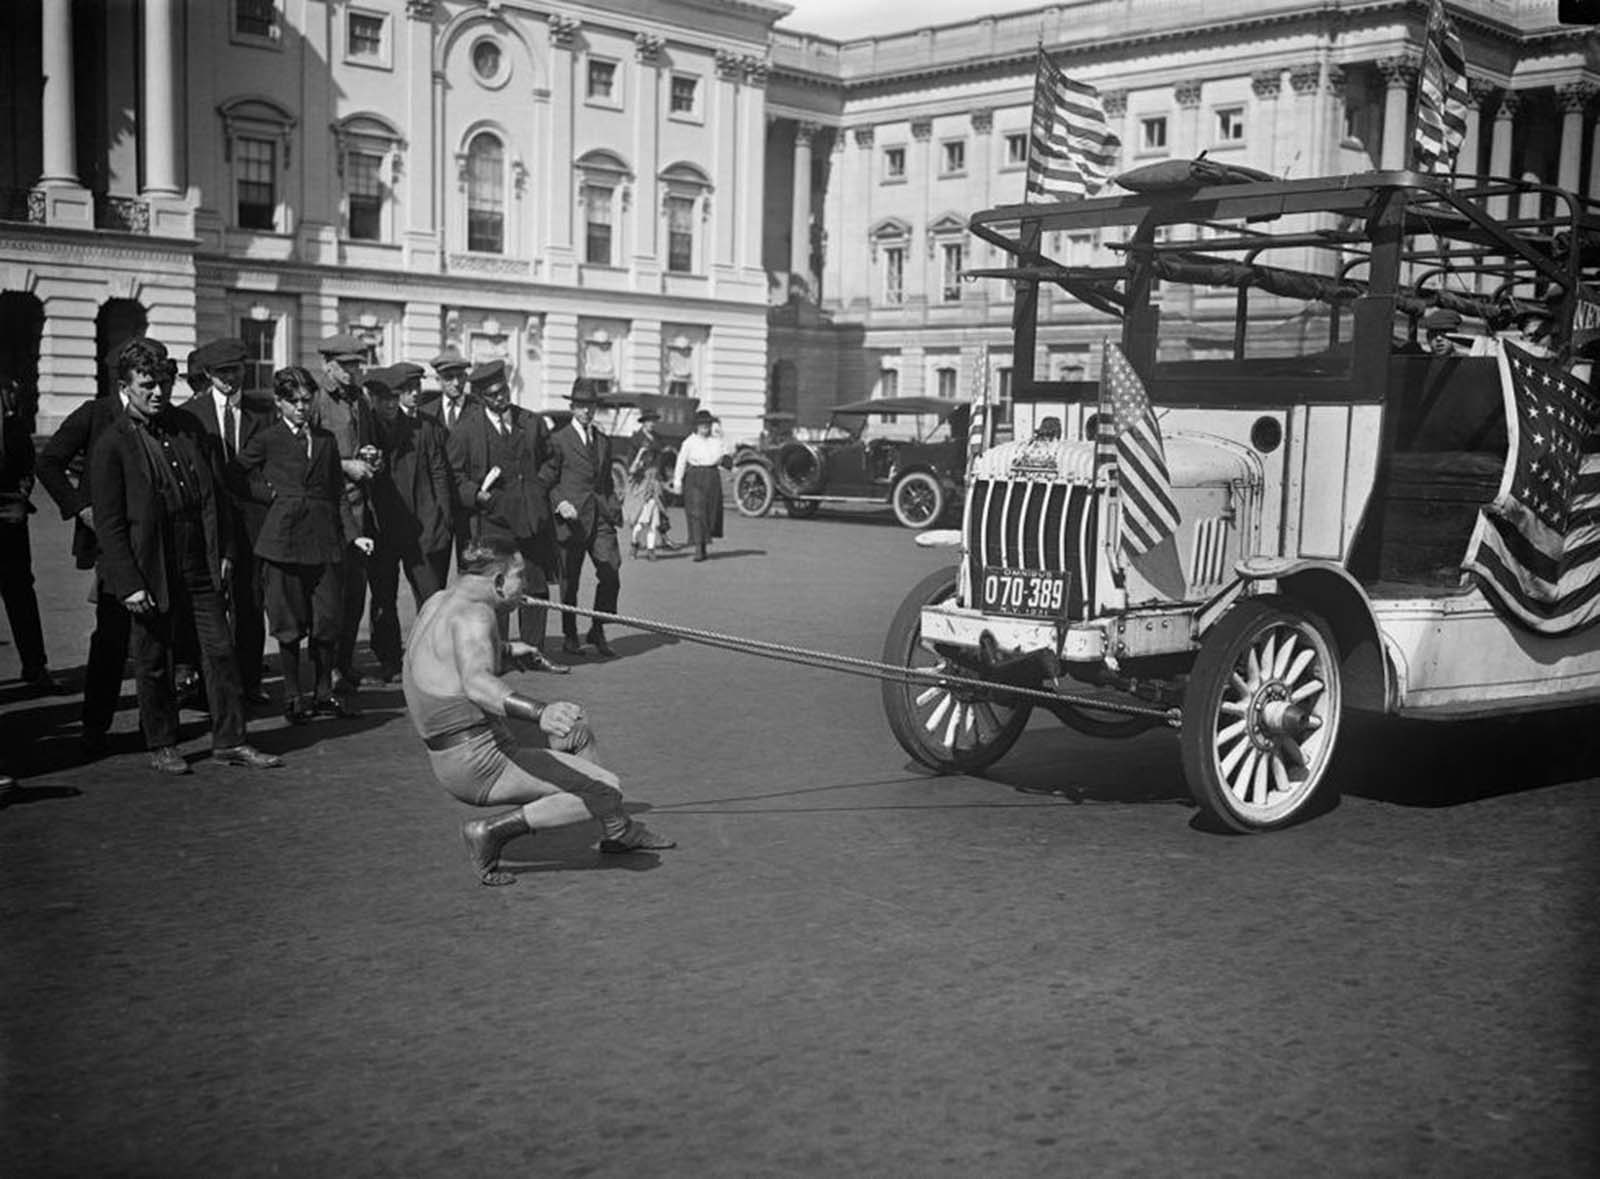 A strongman pulls a car with his teeth outside of the U.S. Capitol building in Washington D.C., 1921